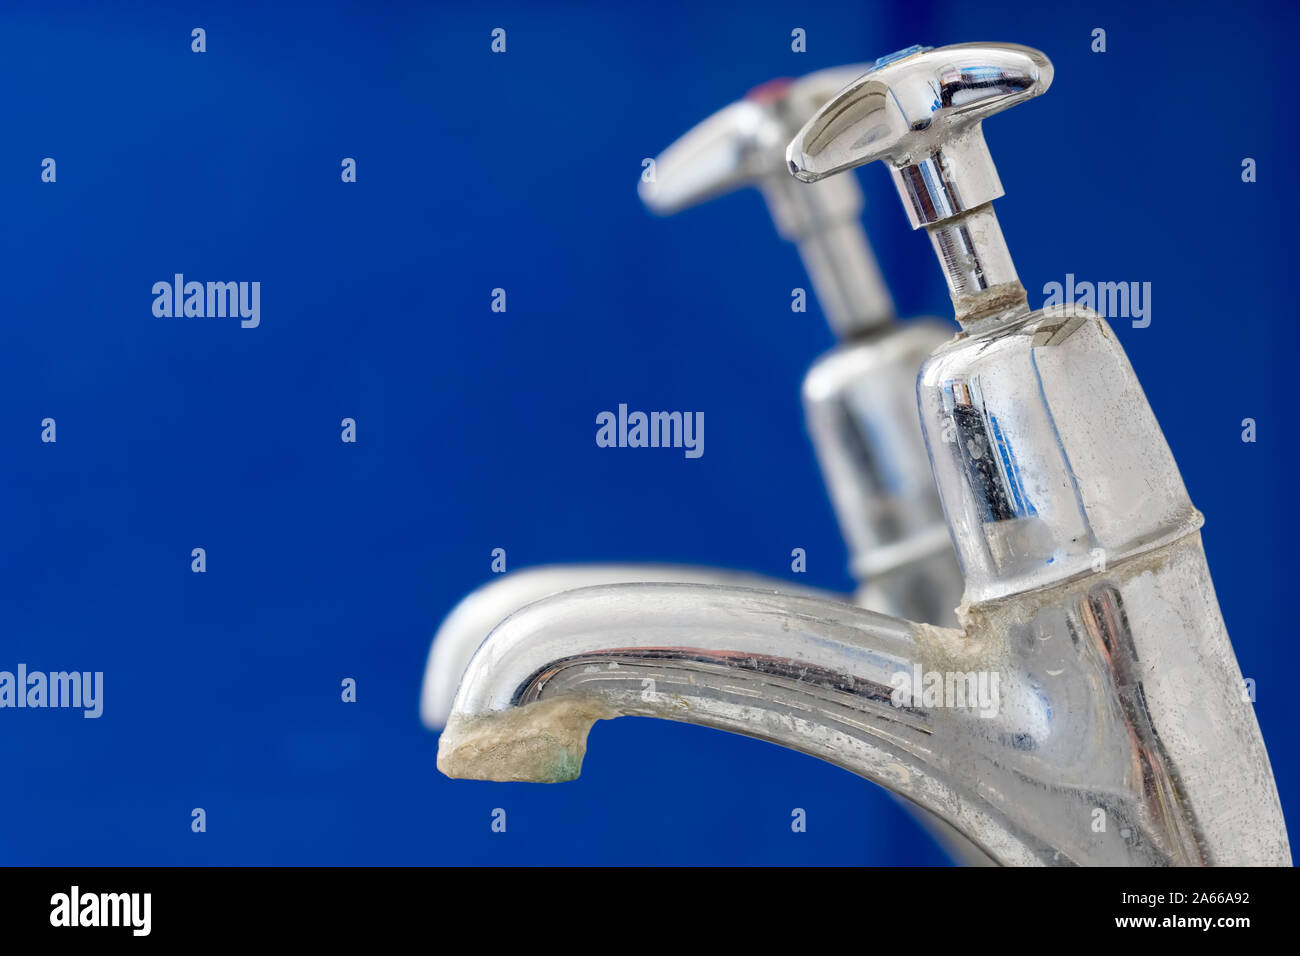 Limescale. Chrome faucet with hard water calcification deposit close-up. Tap needing decalcification and water softener. Scale build-up on old kitchen Stock Photo